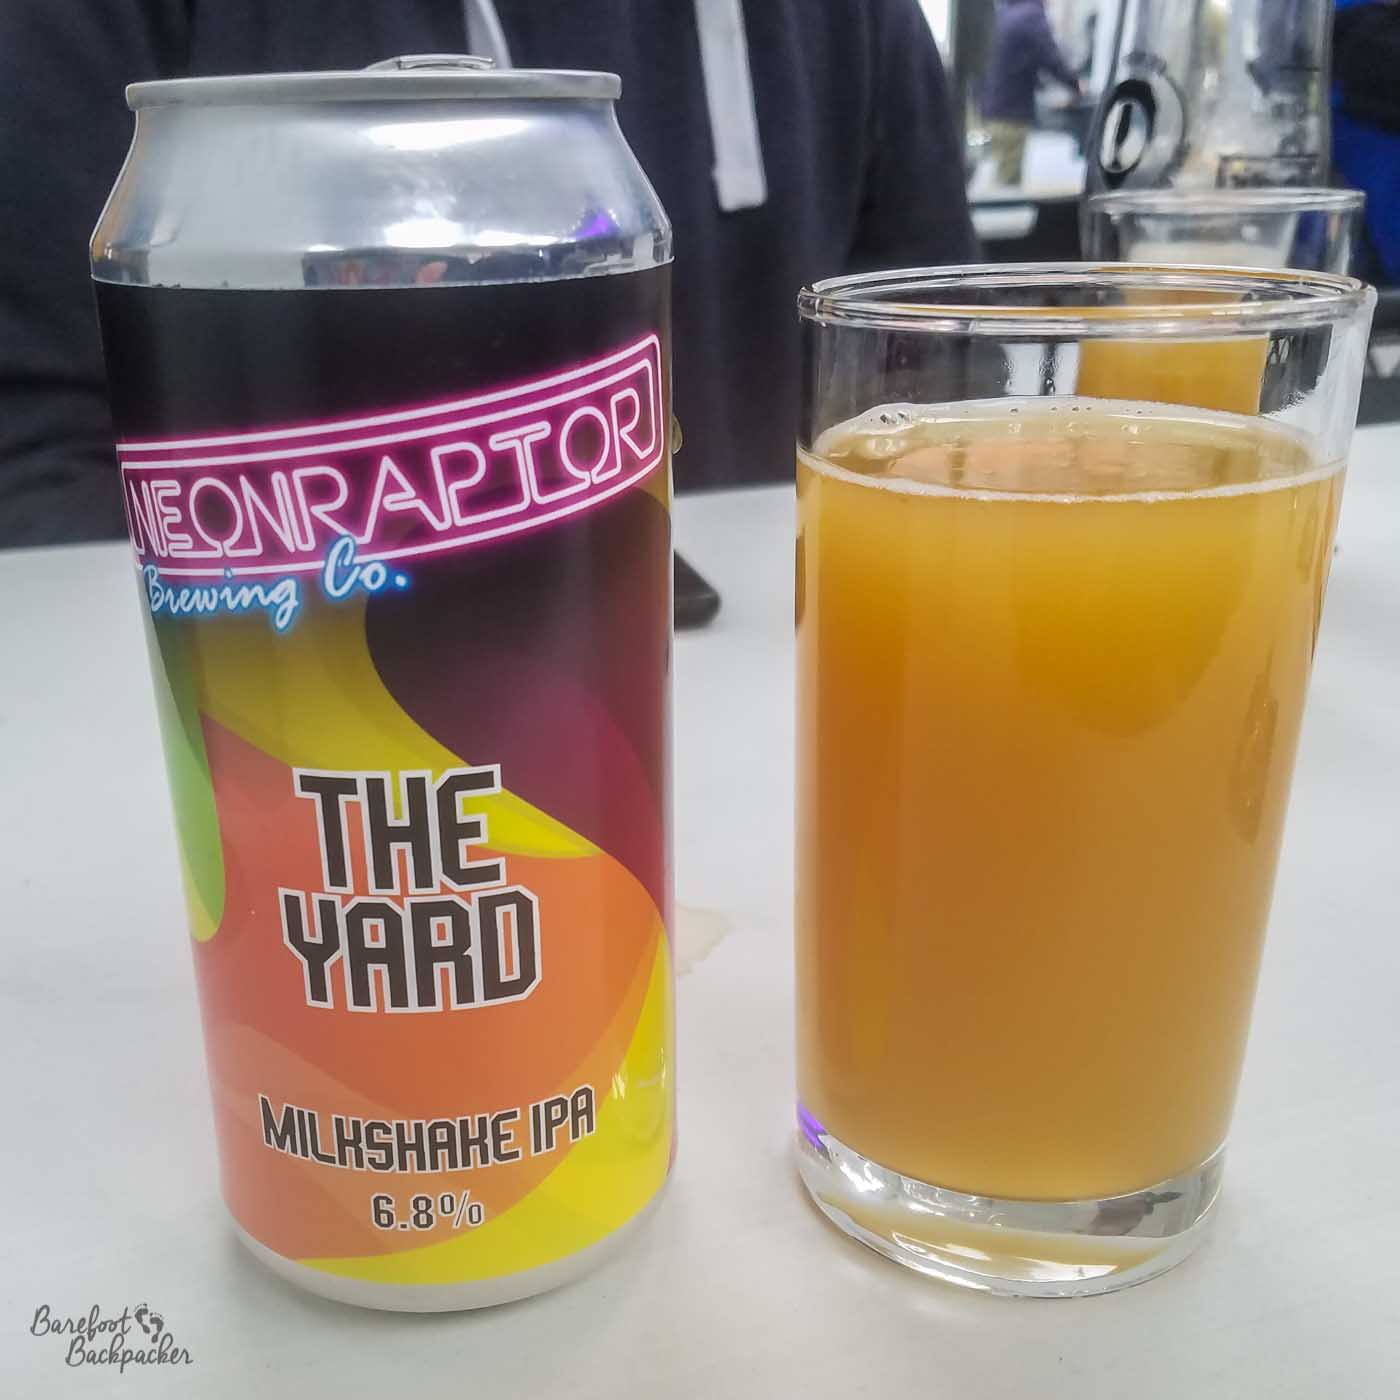 A can of 'The Yard', a beer from Neon Raptor, is on a table with a glass full of it next to it. The beer is cloudy and has the look and feel of a thick pulpy fruit juice. The style is known as a Milkshake IPA and it is 6.8%.